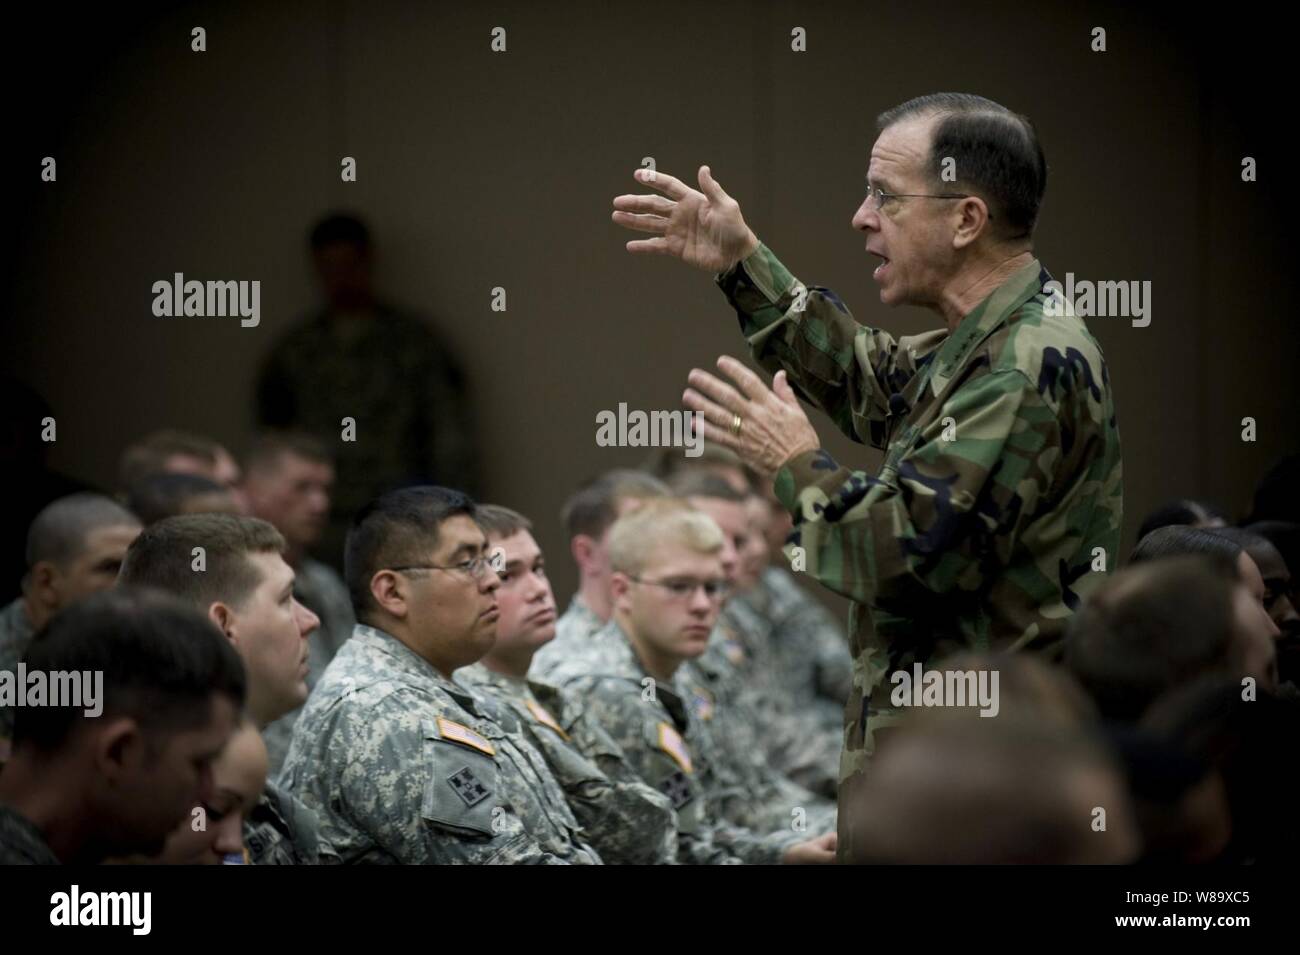 Chairman of the Joint Chiefs of Staff Adm. Mike Mullen, U.S. Navy, answers questions during an all-hands call with soldiers assigned to Fort Hood, Texas, on April 16, 2009.  Mullen is on a four-day tour of installations visiting service members in the Lone Star state. Stock Photo